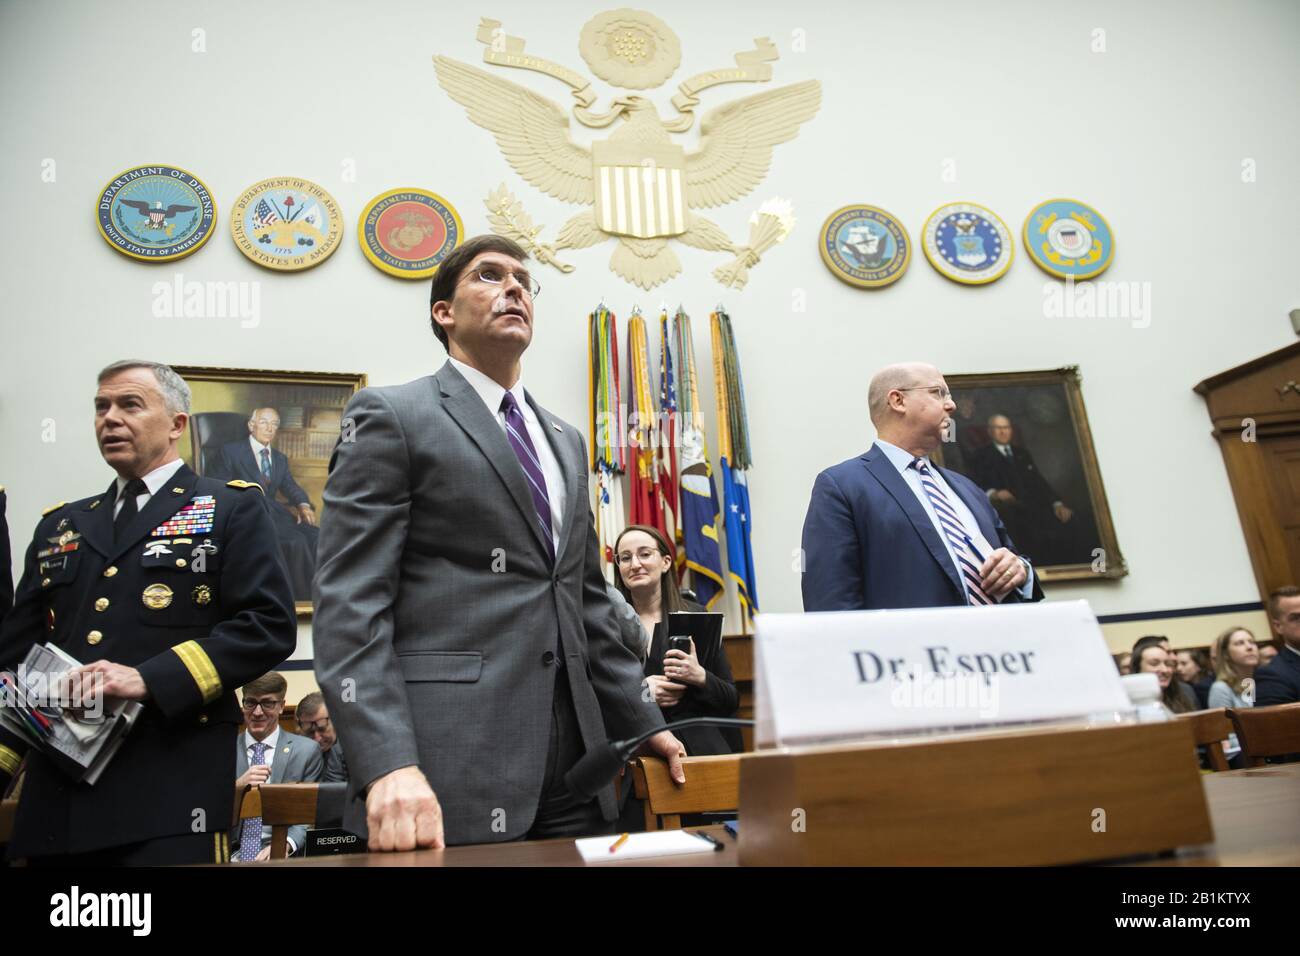 Defense Secretary Mark Esper arrives to testify on the Defense Department's FY2021 budget request during a House Armed Services Committee hearing on Capitol Hill in Washington, D.C. on Wednesday, February 26, 2020. Photo by Kevin Dietsch/UPI Stock Photo